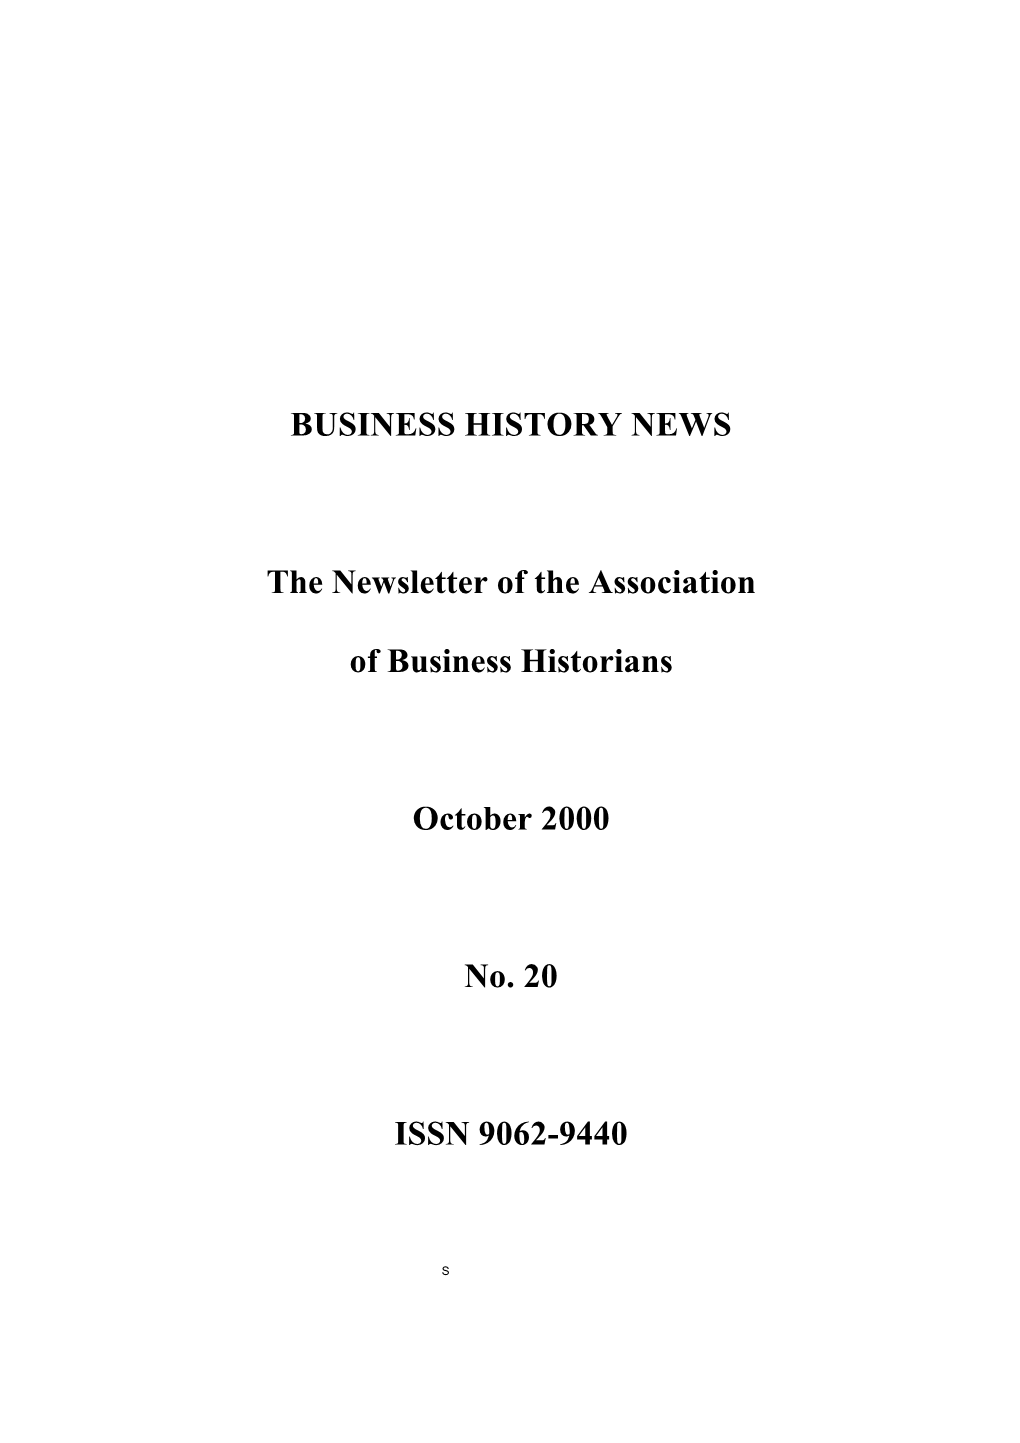 BUSINESS HISTORY NEWS the Newsletter of the Association Of